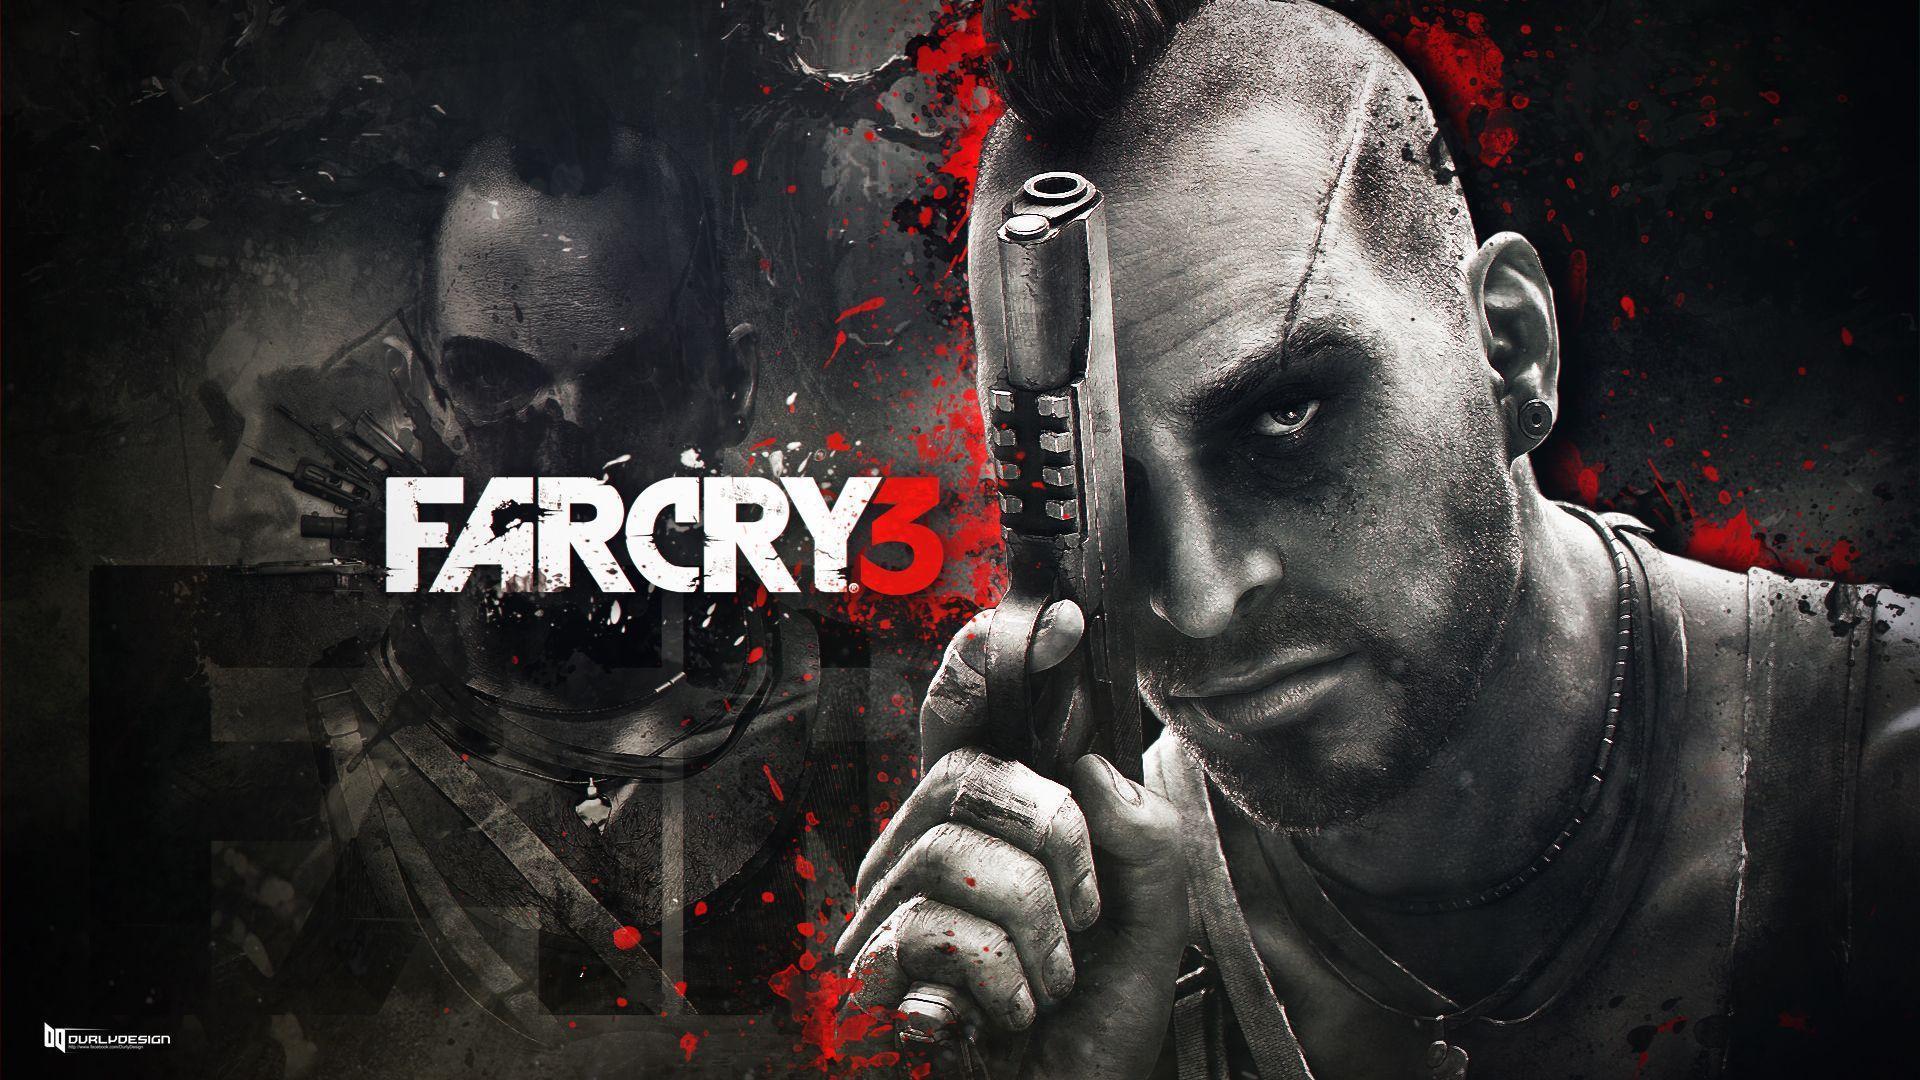 Farcry 3 / Vaas Wallpapers by durly0505